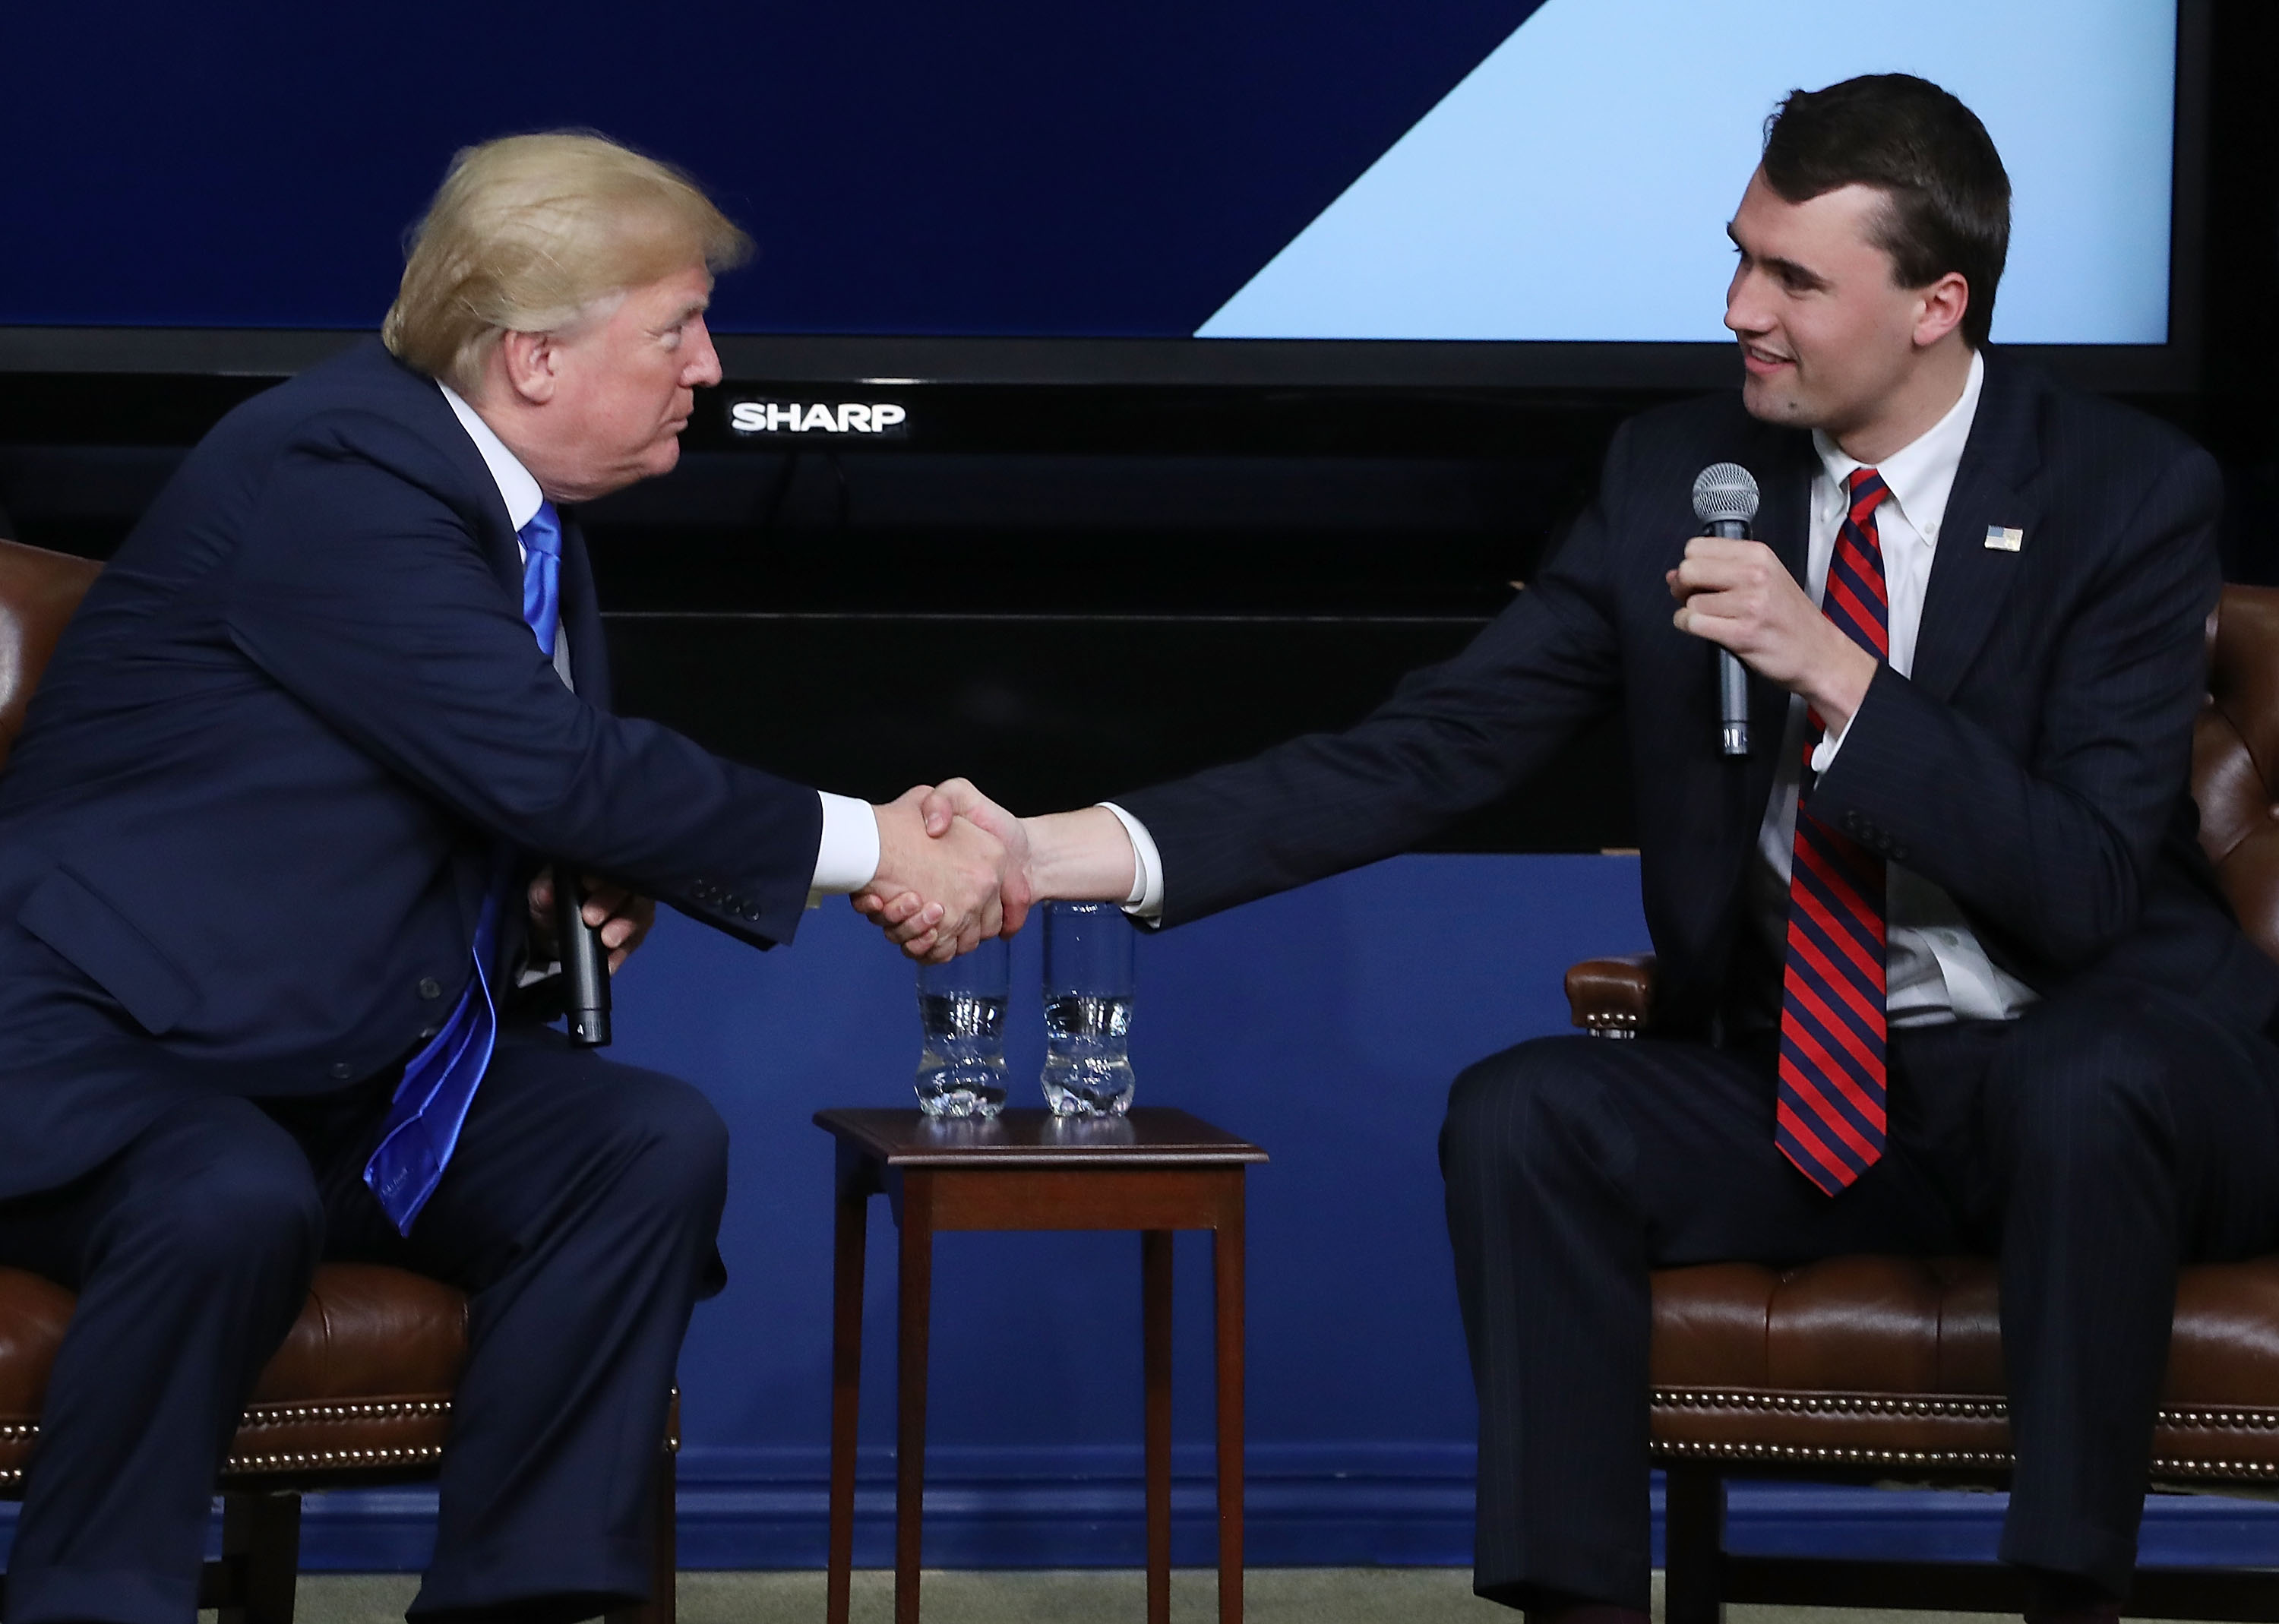 "White guilt" will direct GOP donors away from Trump: Charlie Kirk - breaking news in my area - United Kingdom - Public News Time